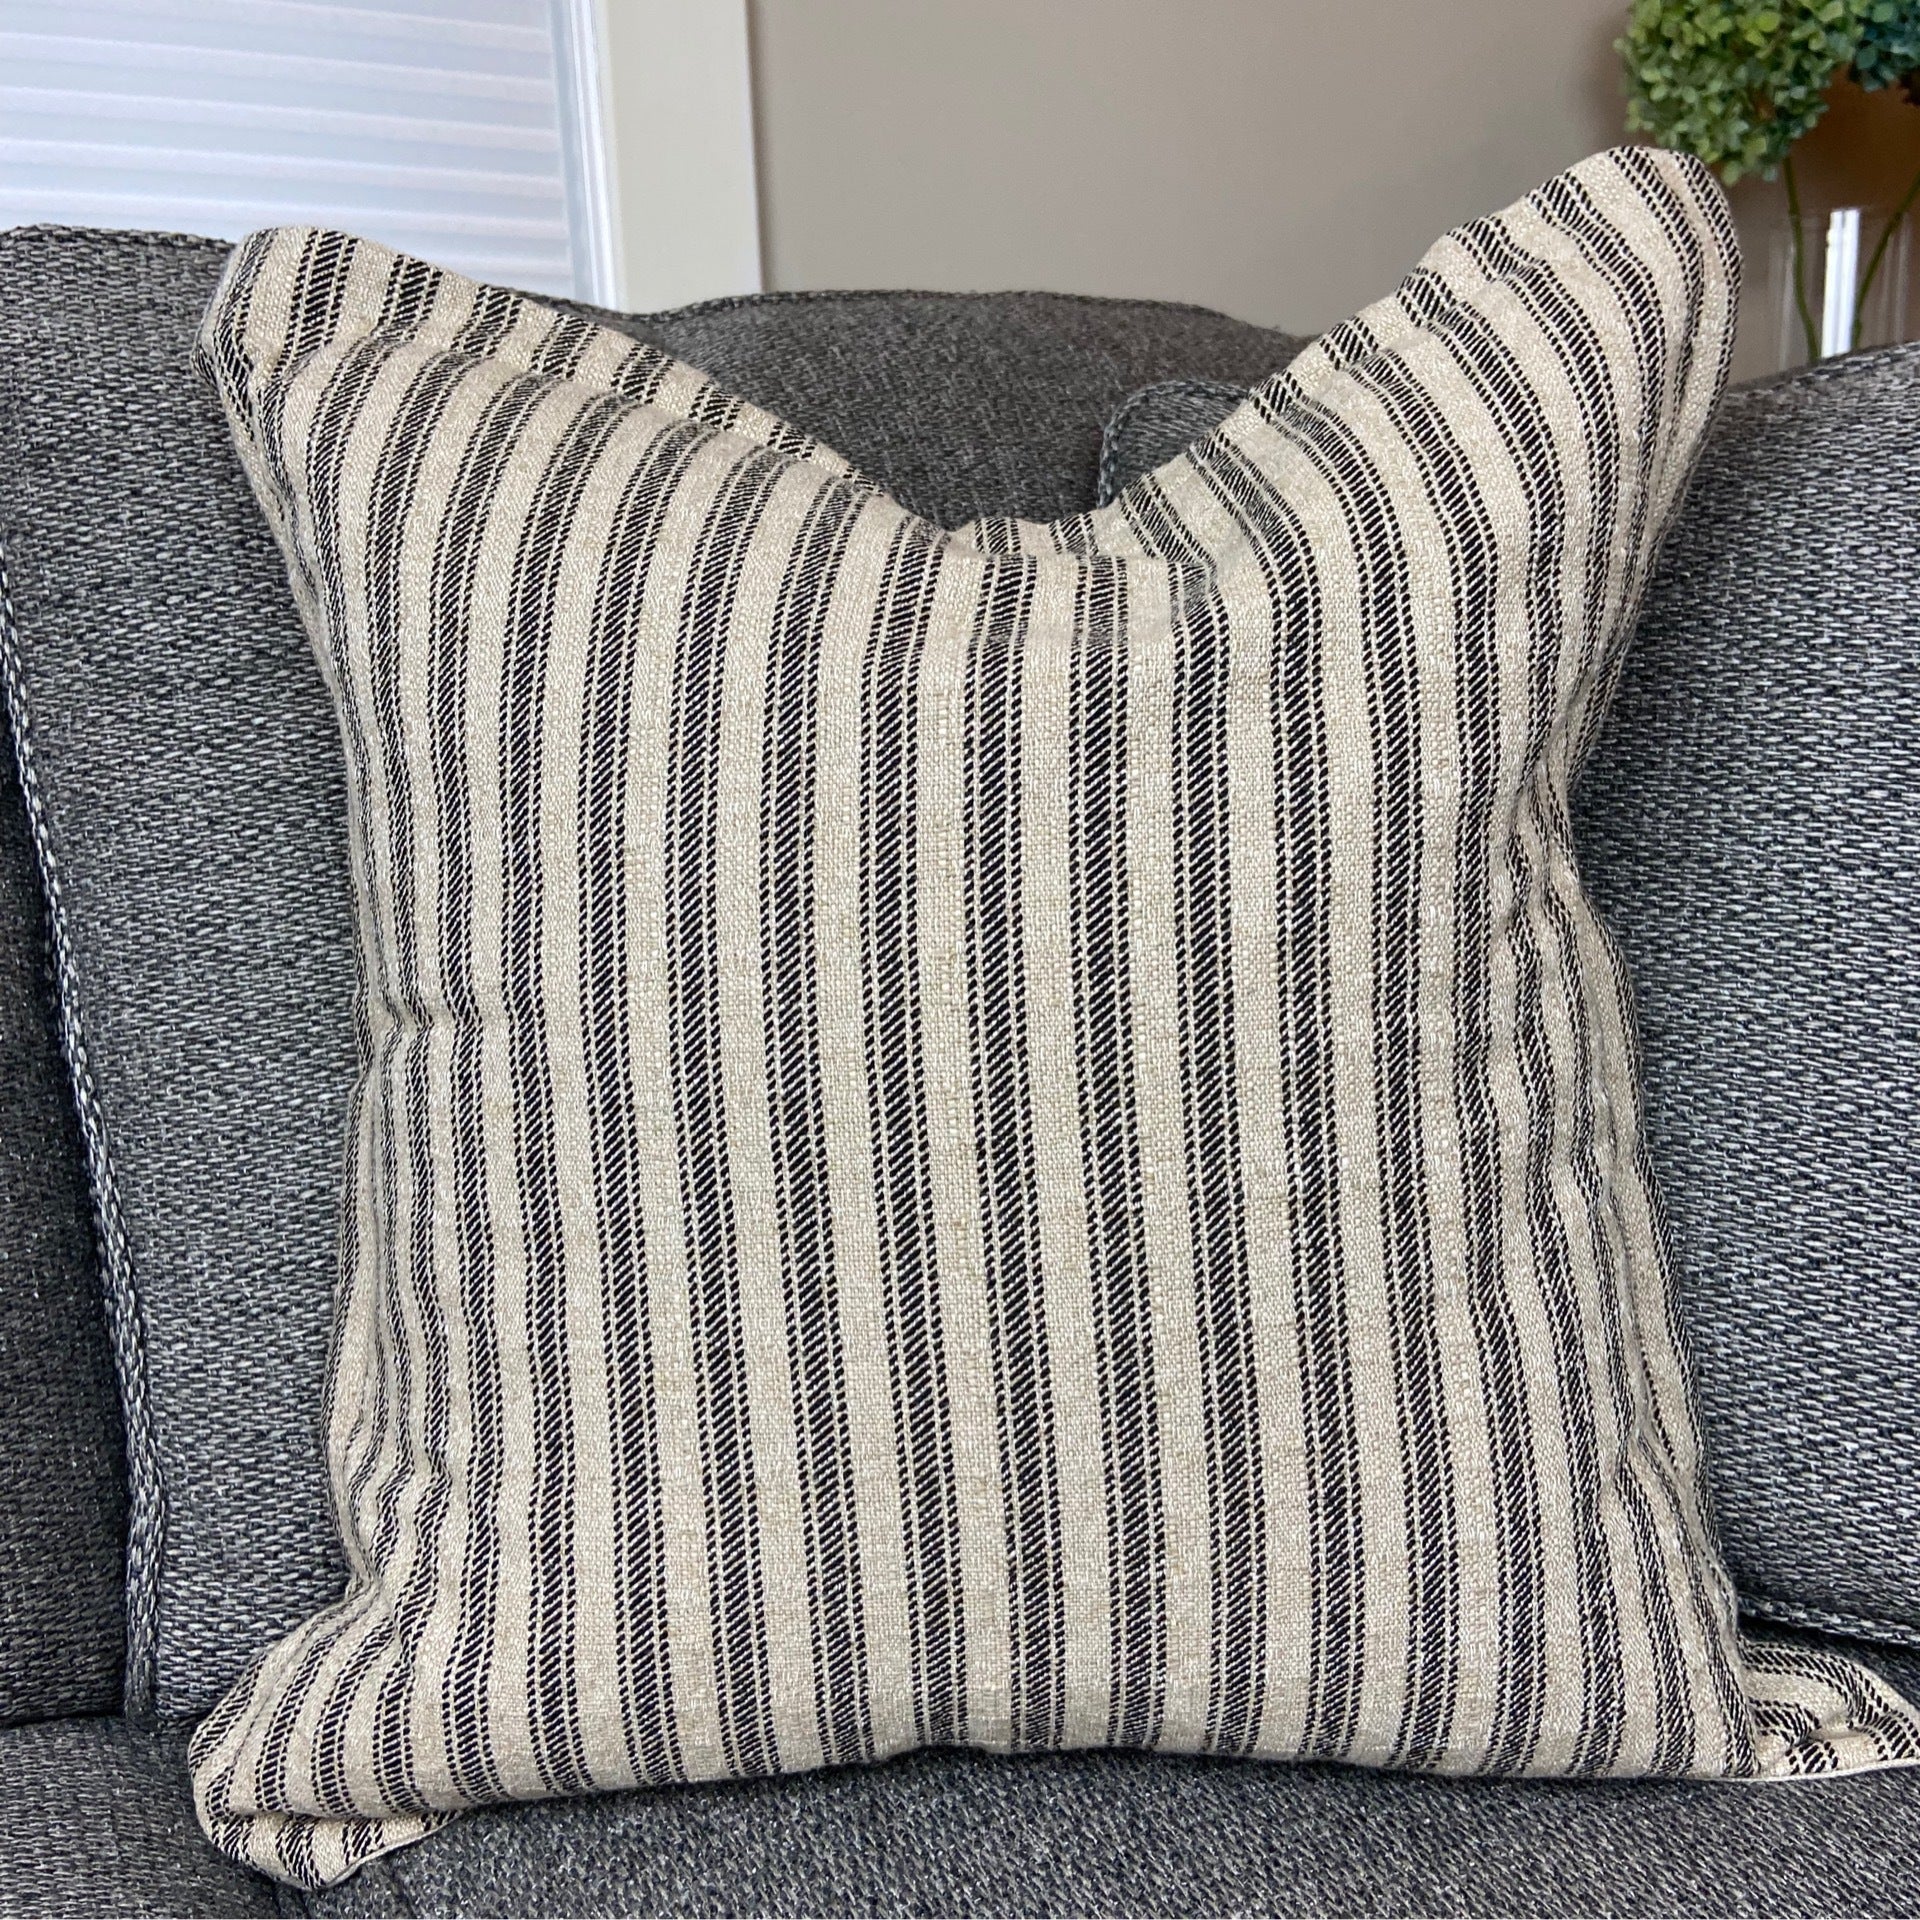 Farmhouse Home: 10 Minute Ticking Stripe Pillow - Making it in the Mountains